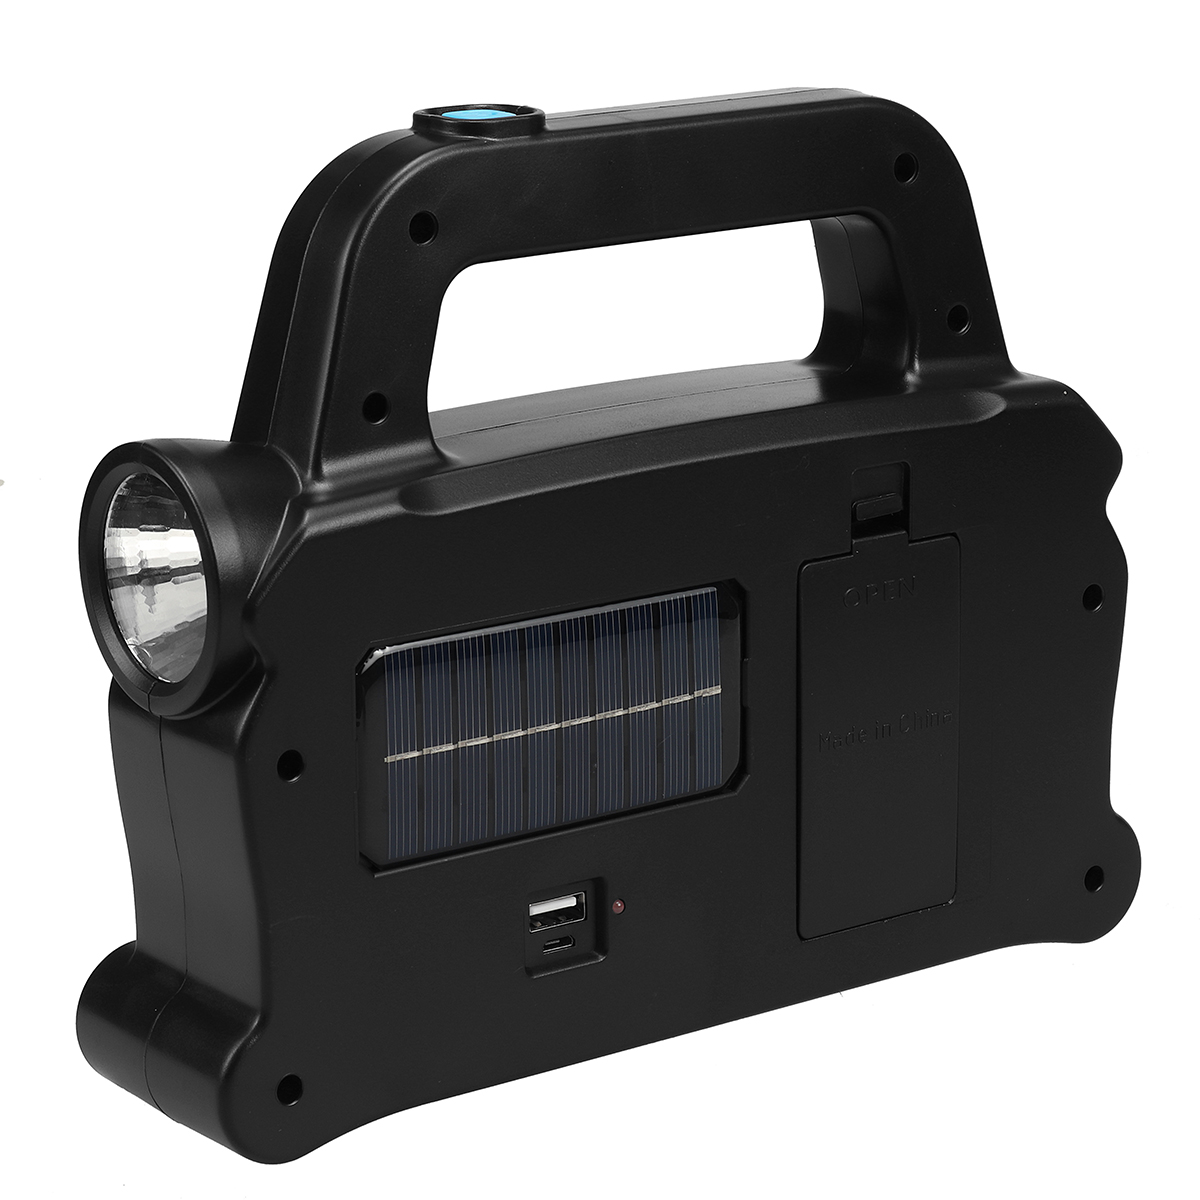 COB-LED-Solar-Work-Lights-IP65-Waterproof-3-Mode-USB-Rechargeable-Portable-Floodlight-Lamps-Outdoor--1924944-9